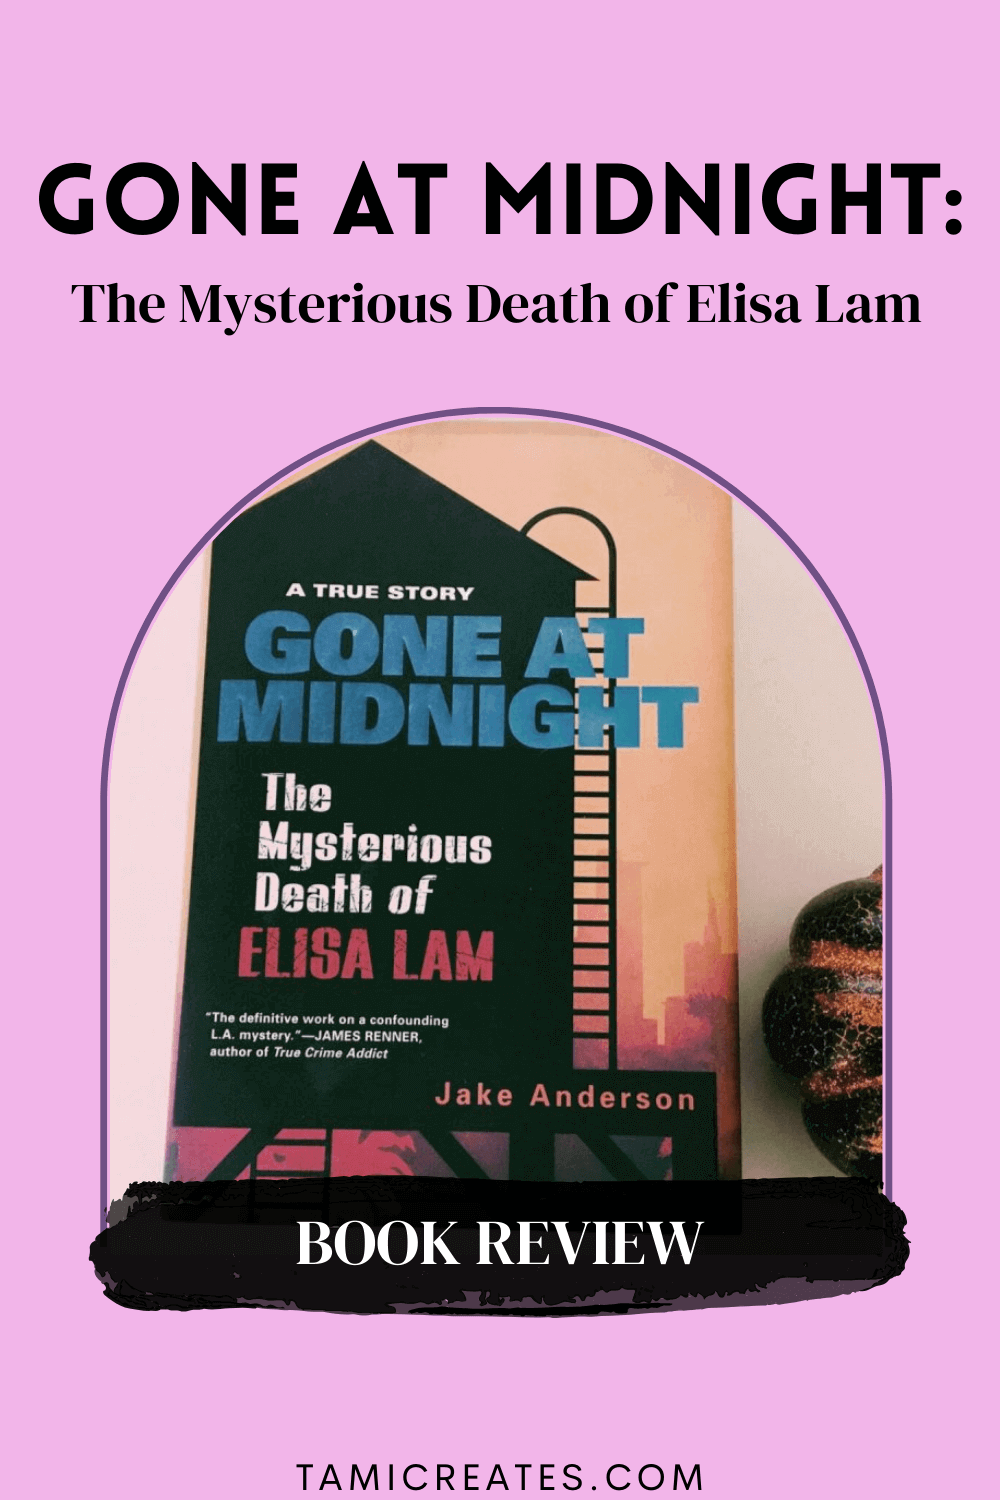 Gone At Midnight dives deep into Elisa Lam’s life, her movements leading up to her tragic death at the Cecil Hotel, and theories surrounding the case. // Gone At Midnight: Book Review